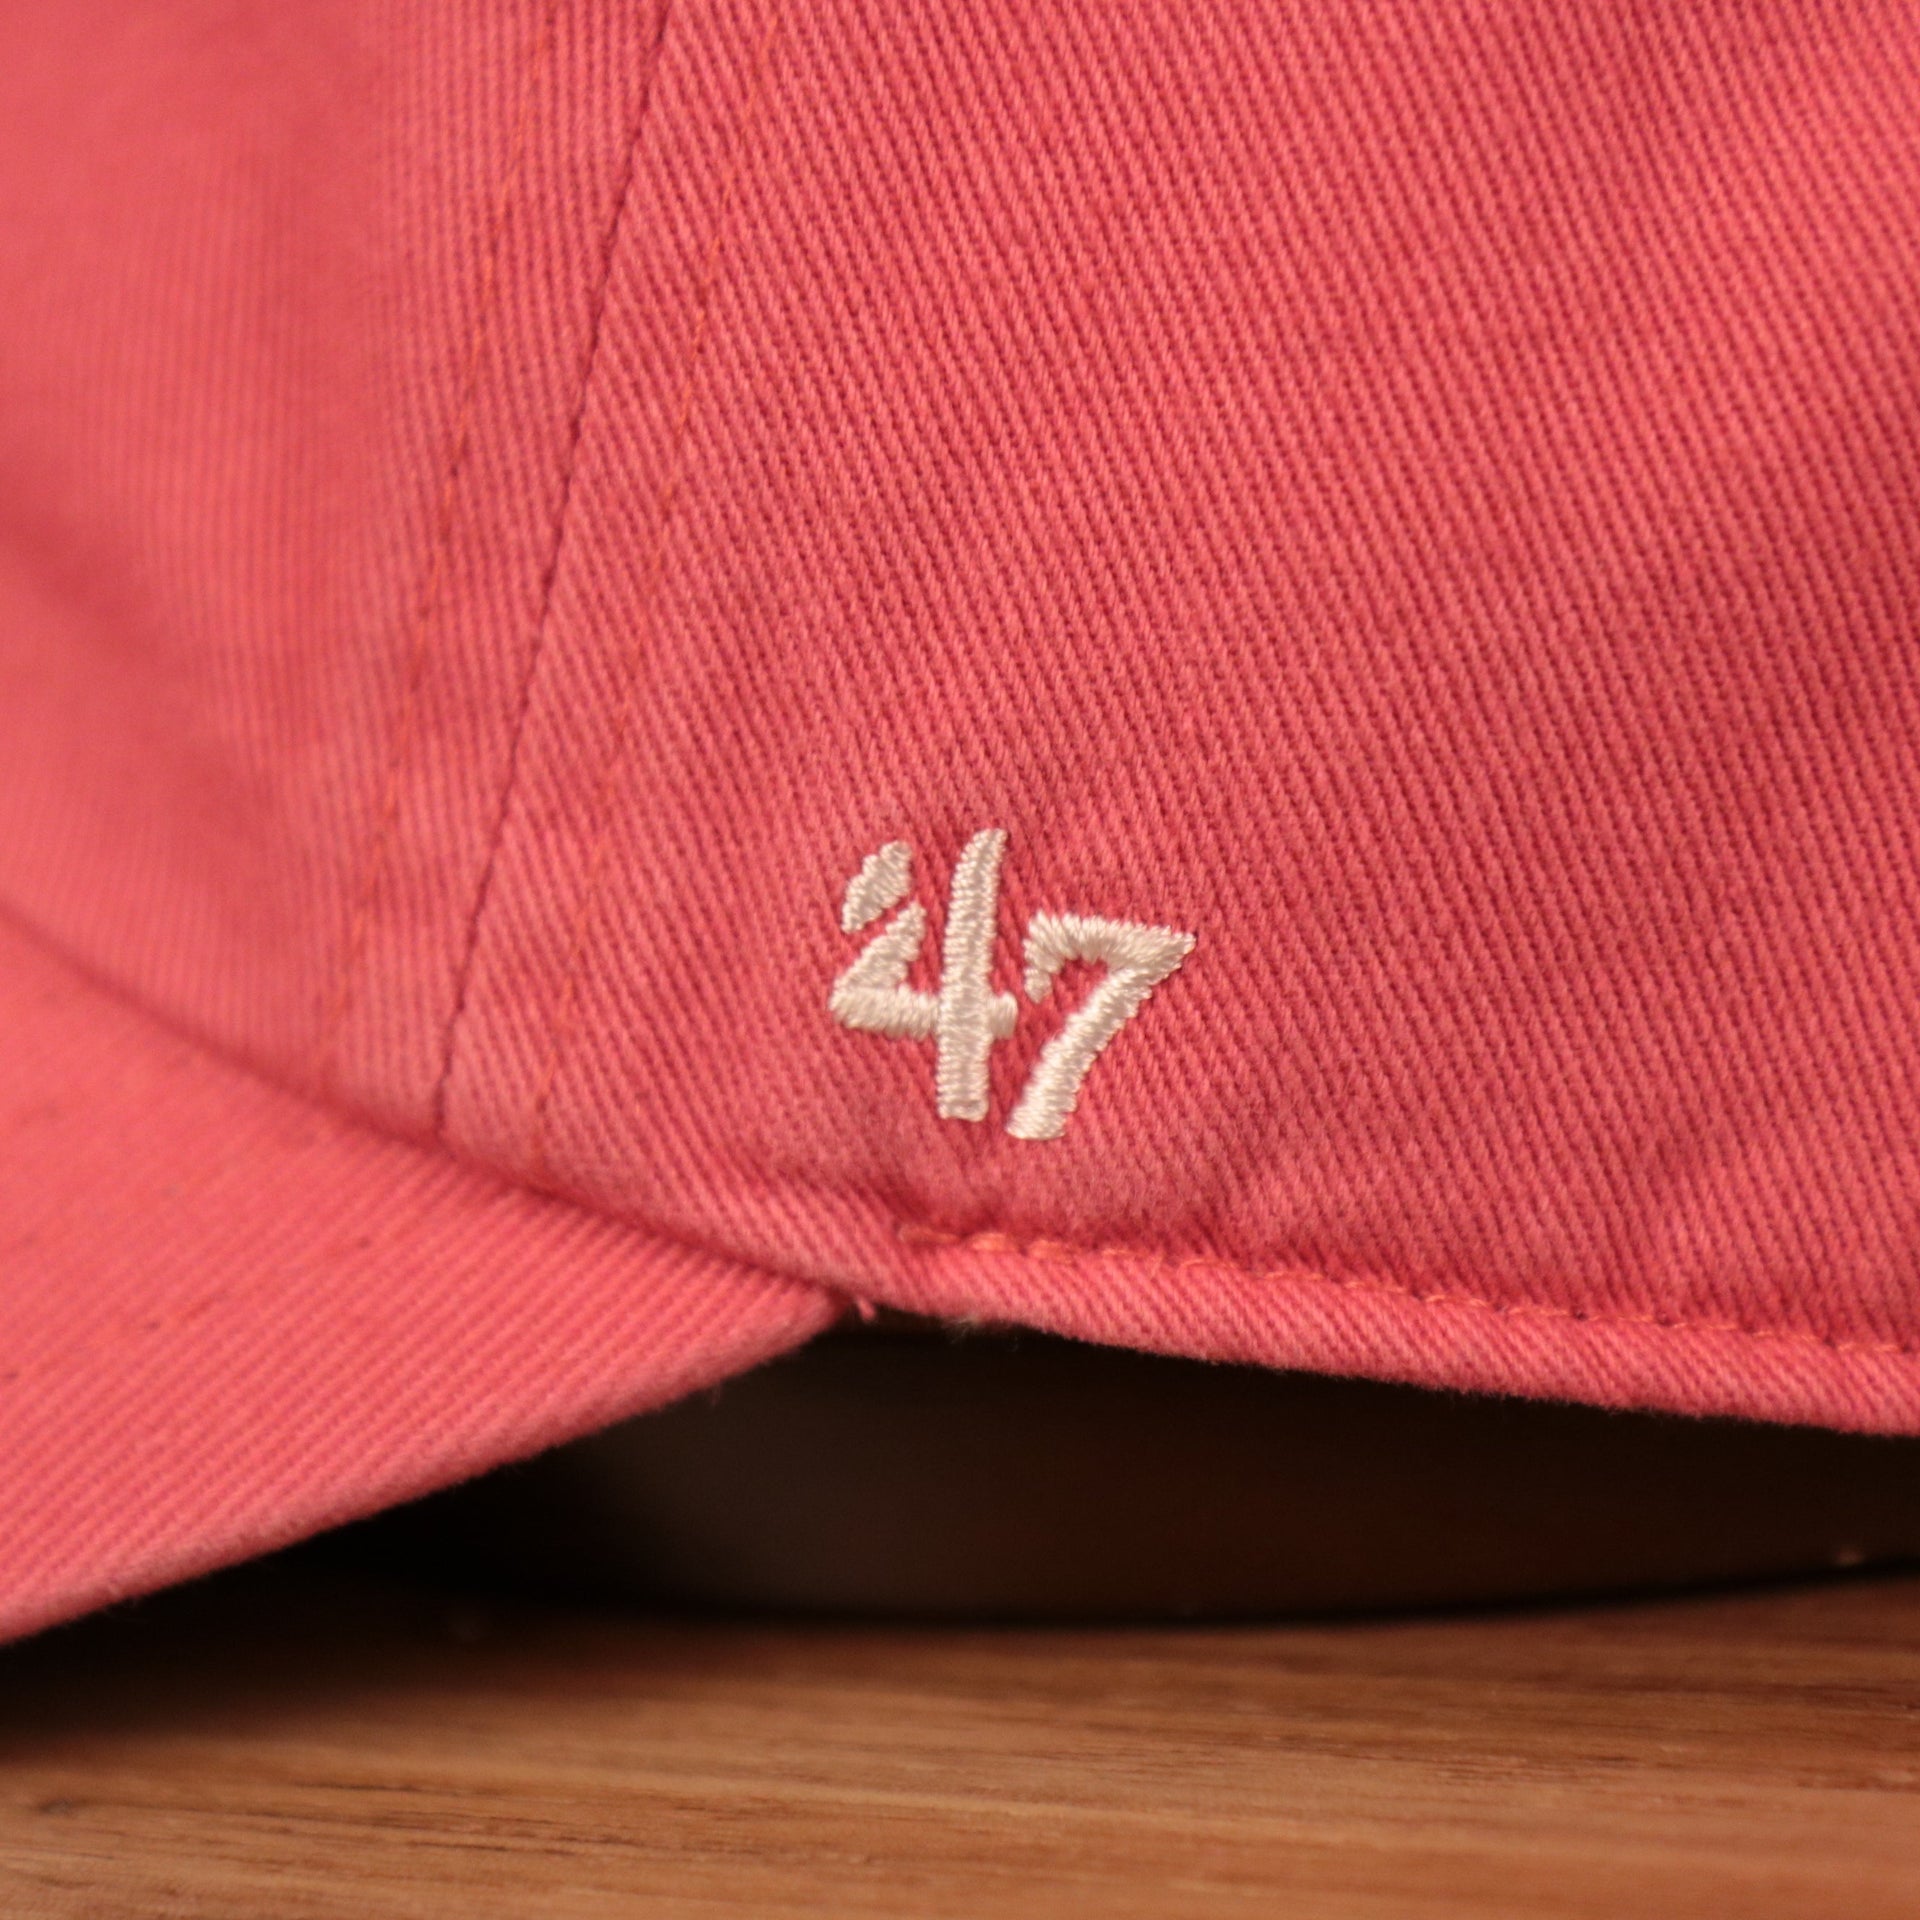 The wearer's left side of the dodgers green bottom dad hat has the logo of 47 Brand.